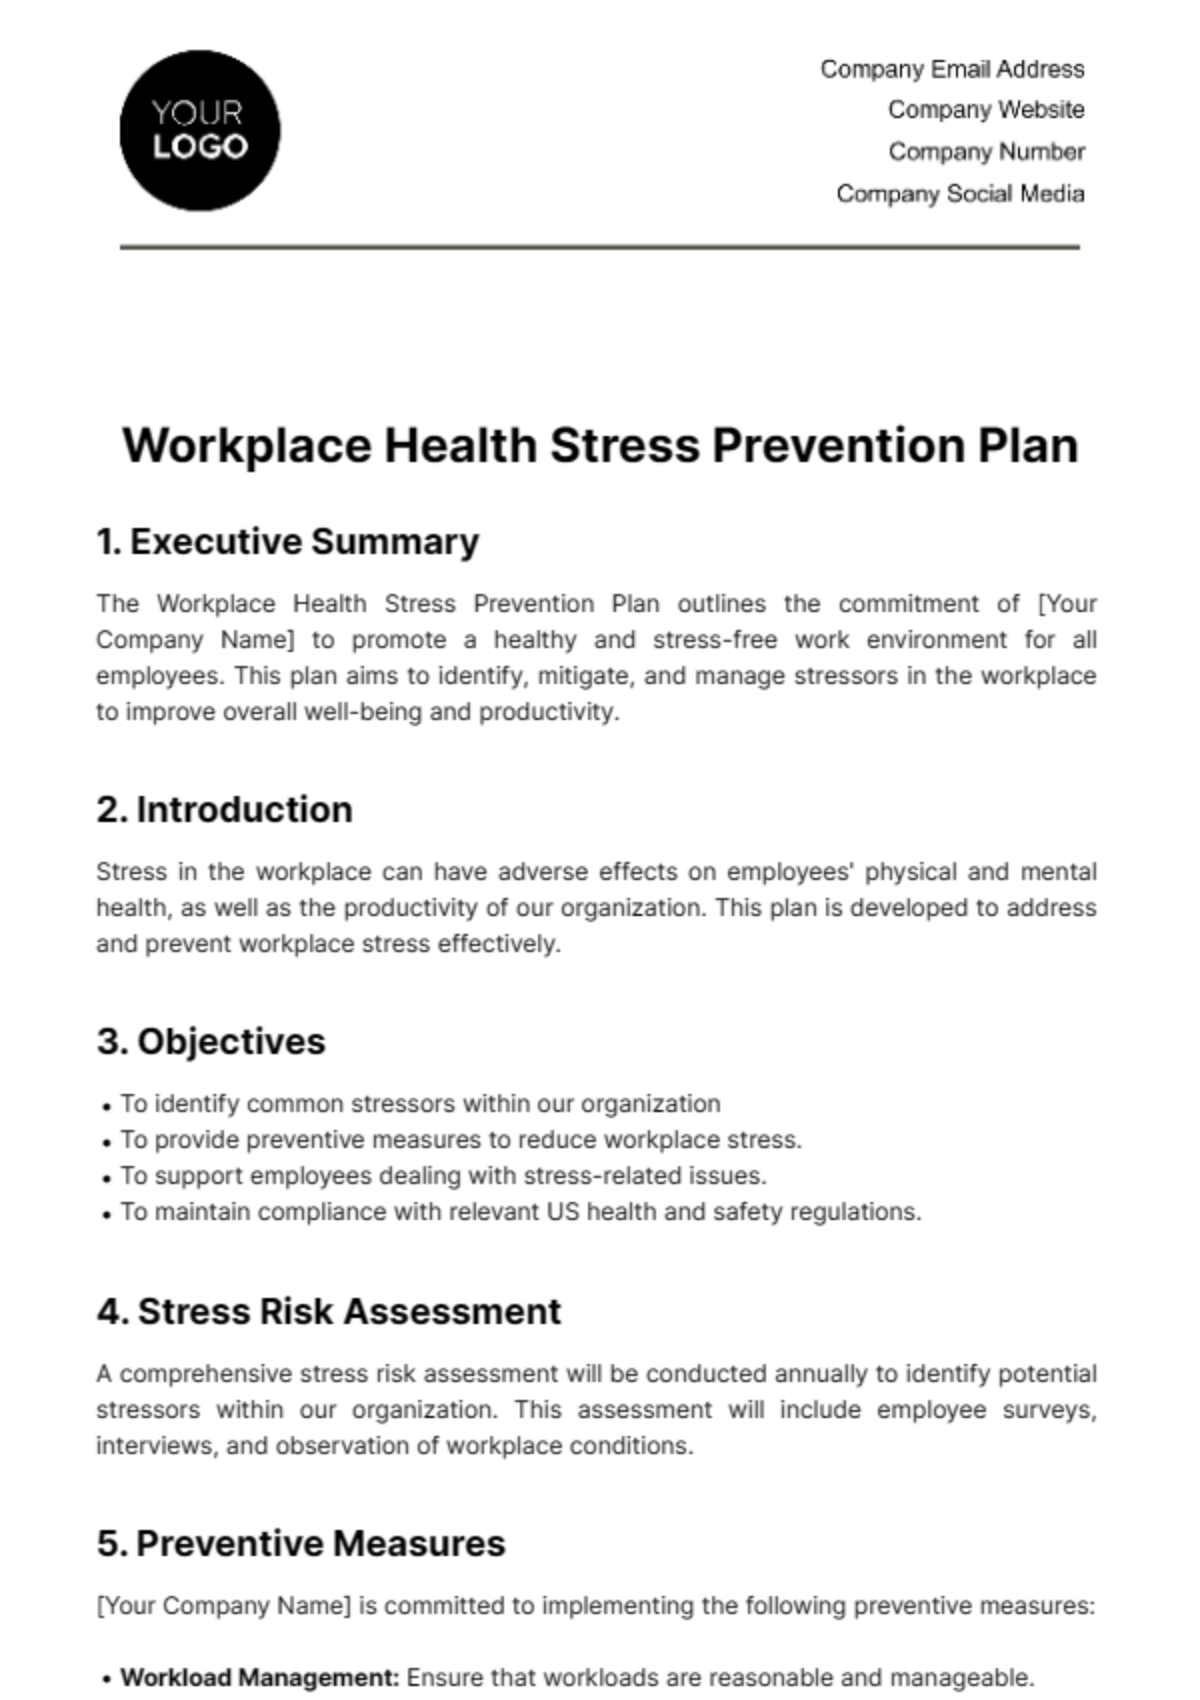 Workplace Health Stress Prevention Plan Template